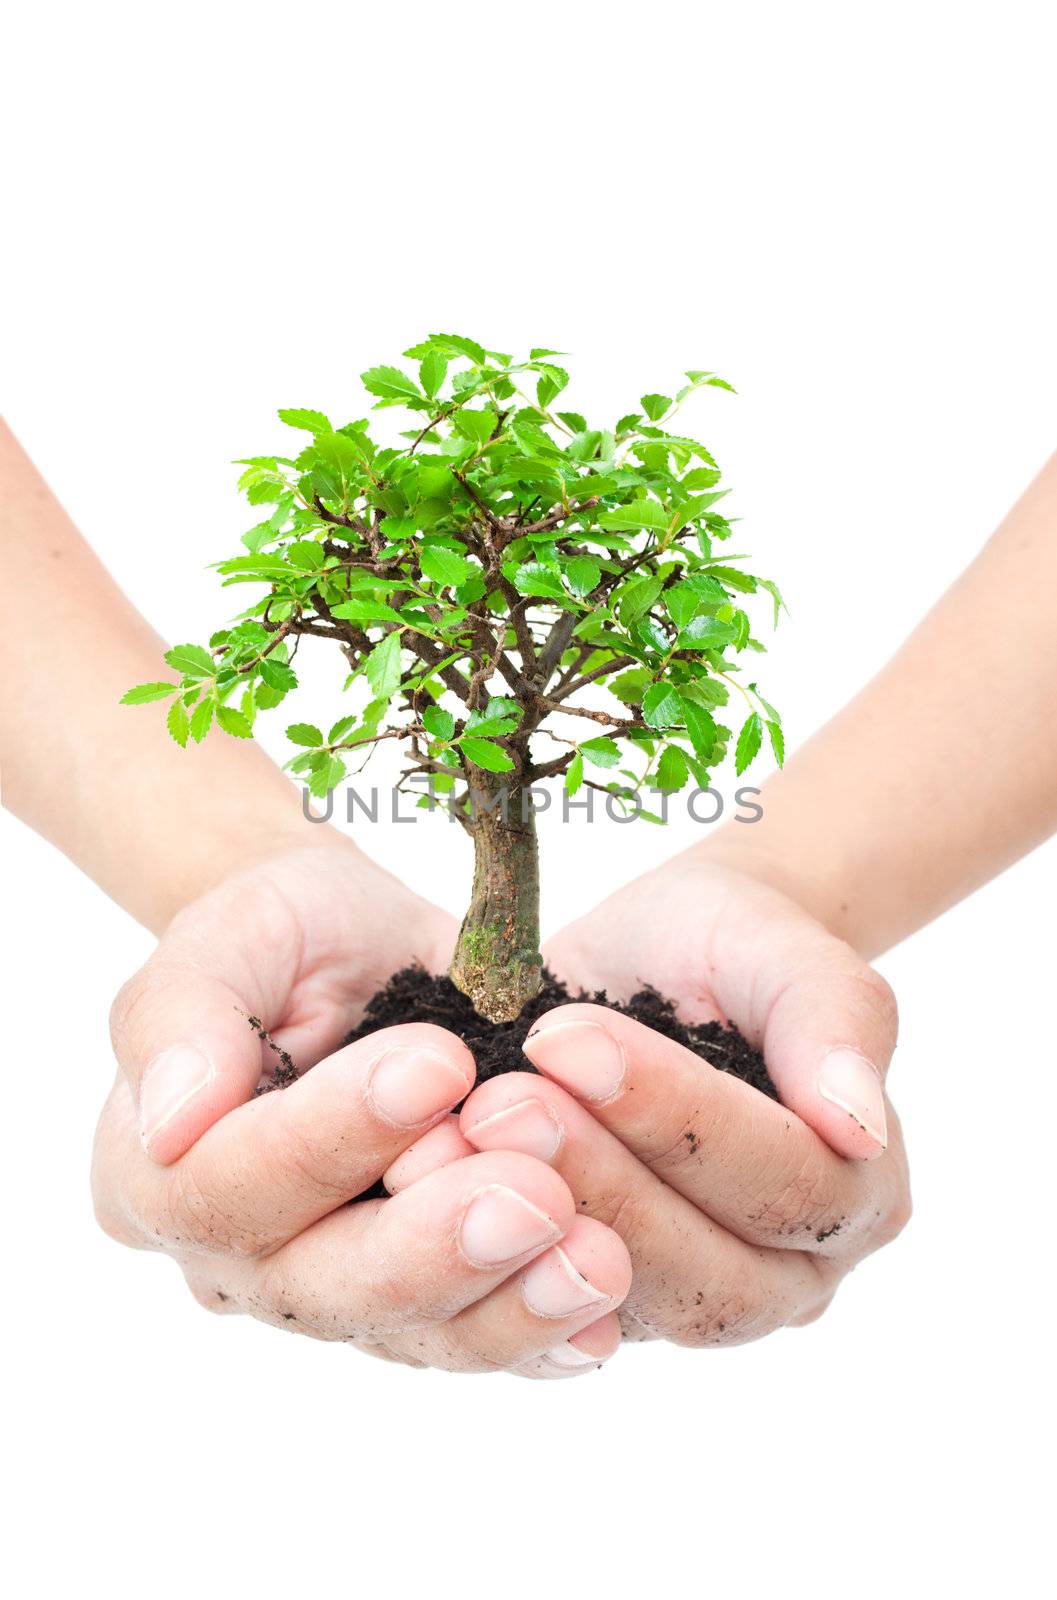 Hands holding a small bonsai tree